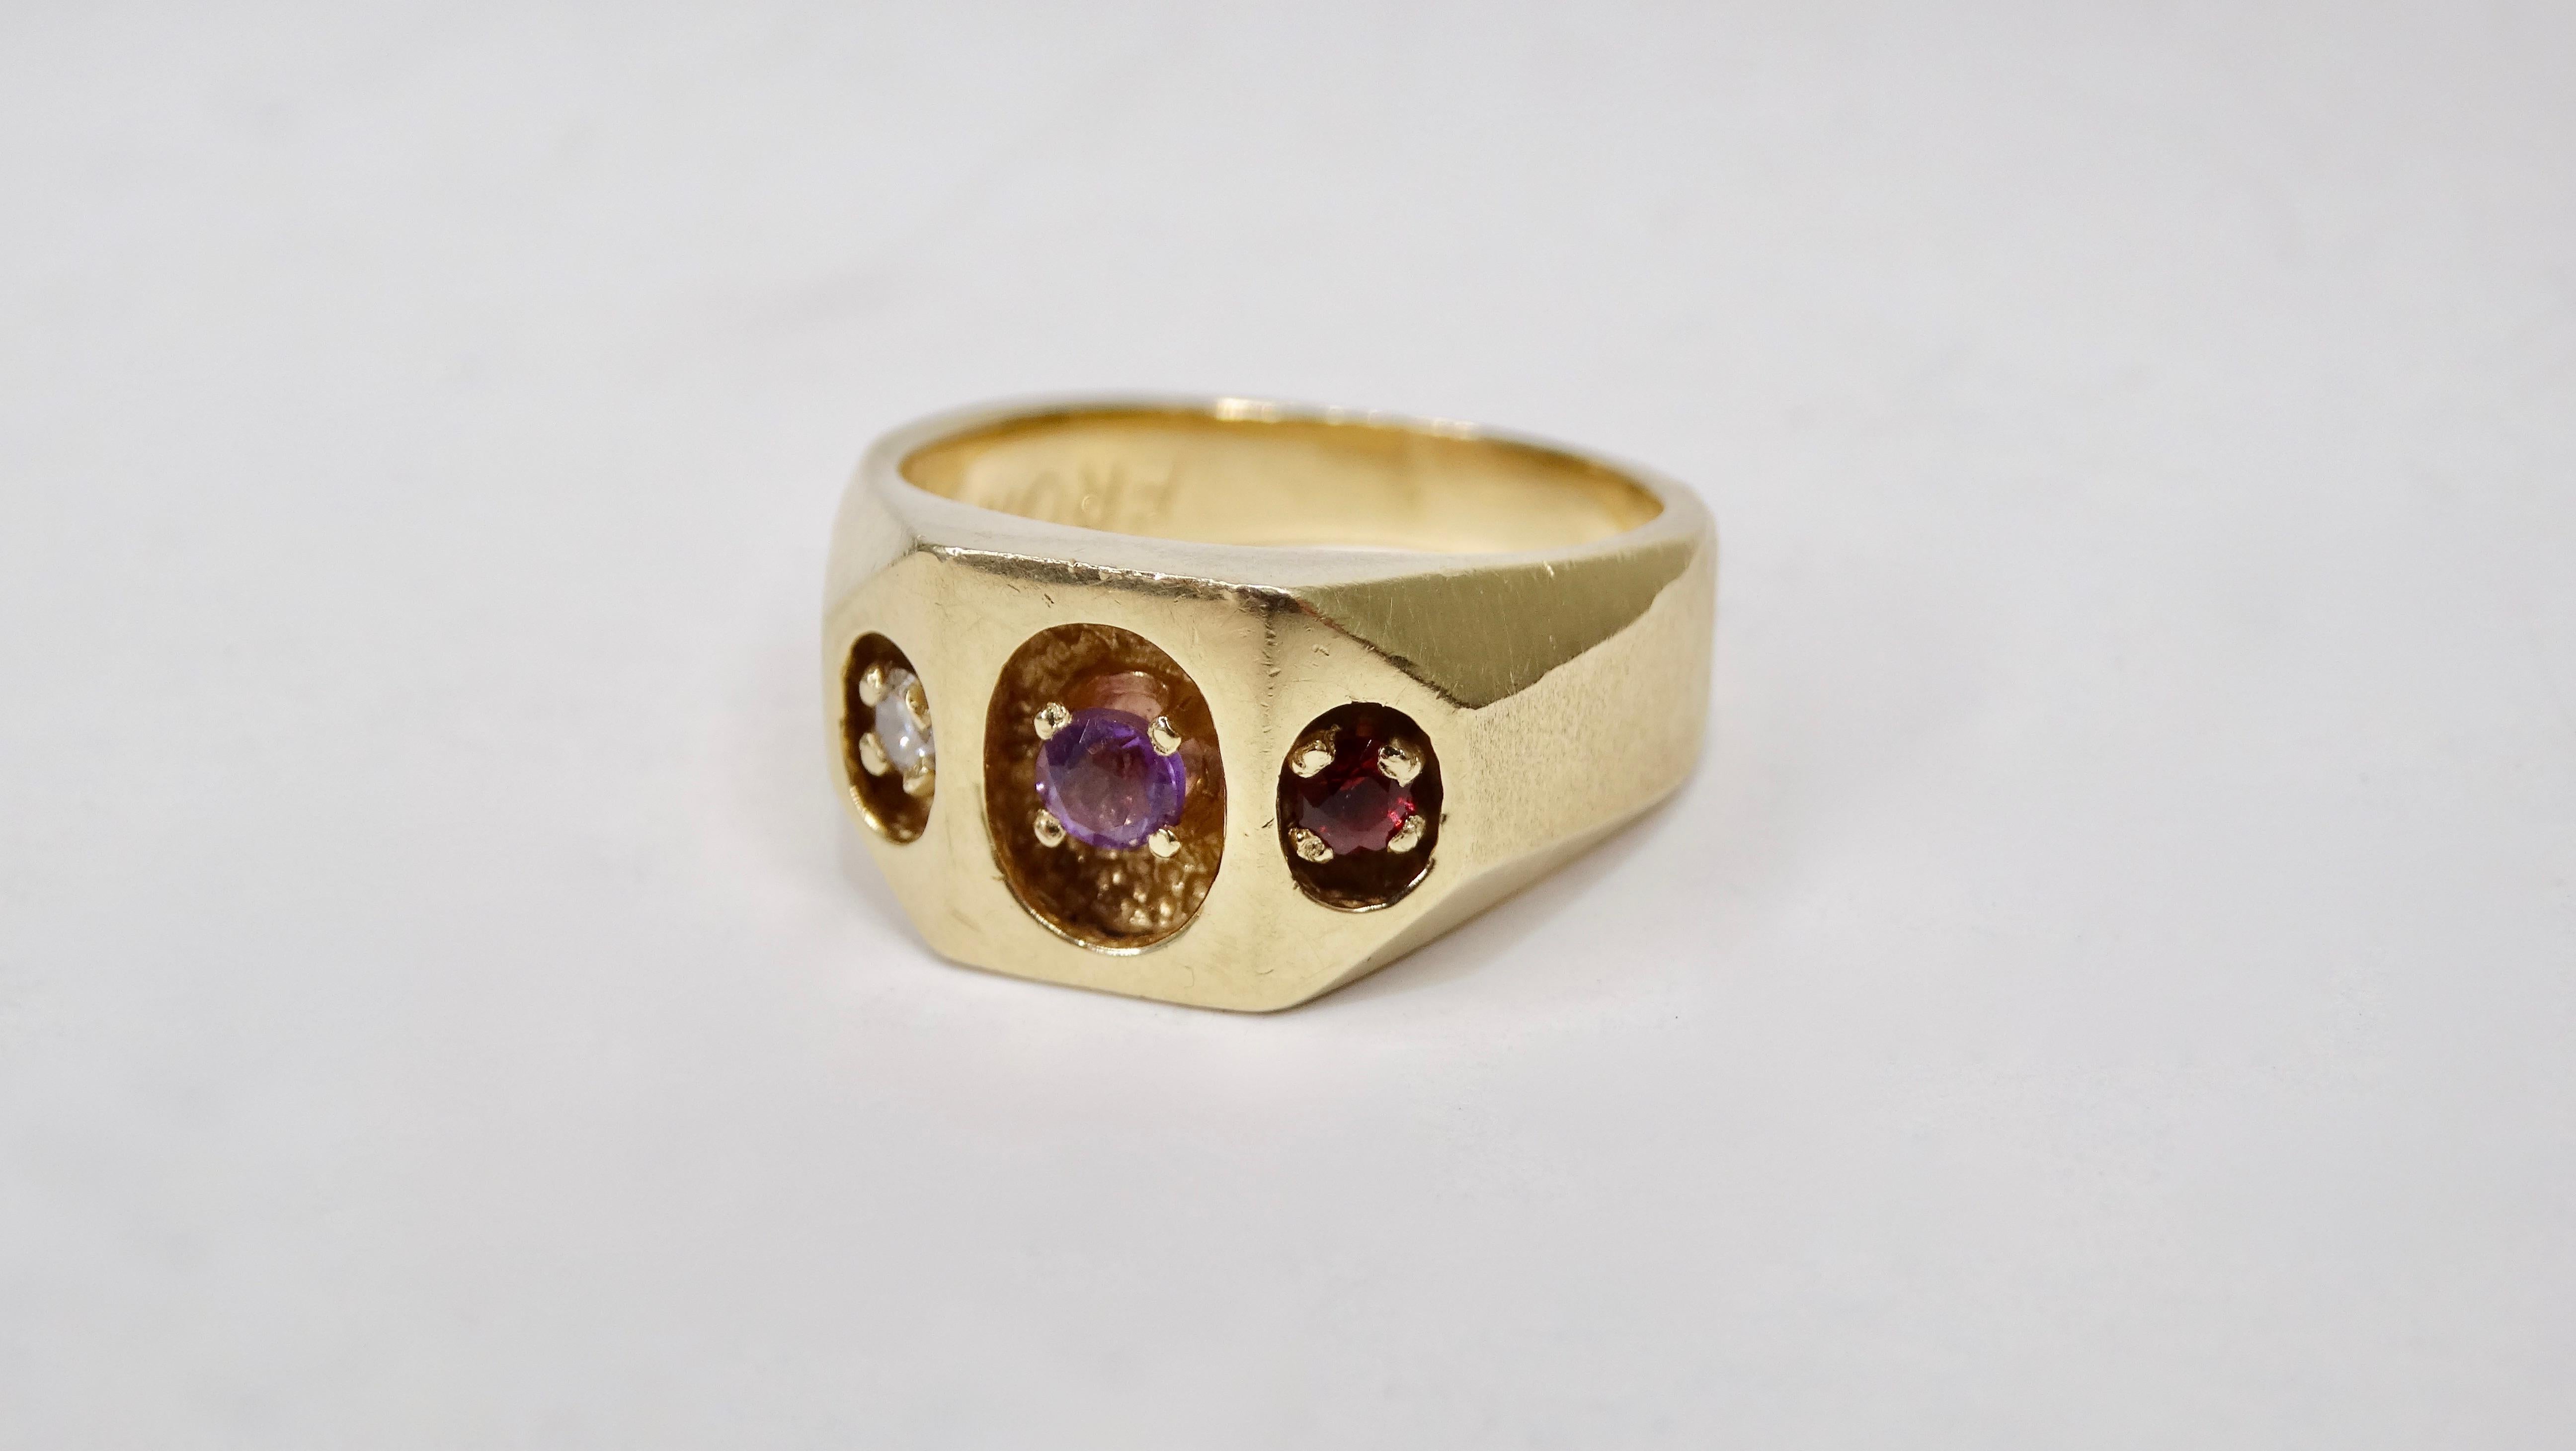 Diamond, Amethyst & Ruby 14k Gold Ring  In Good Condition For Sale In Scottsdale, AZ